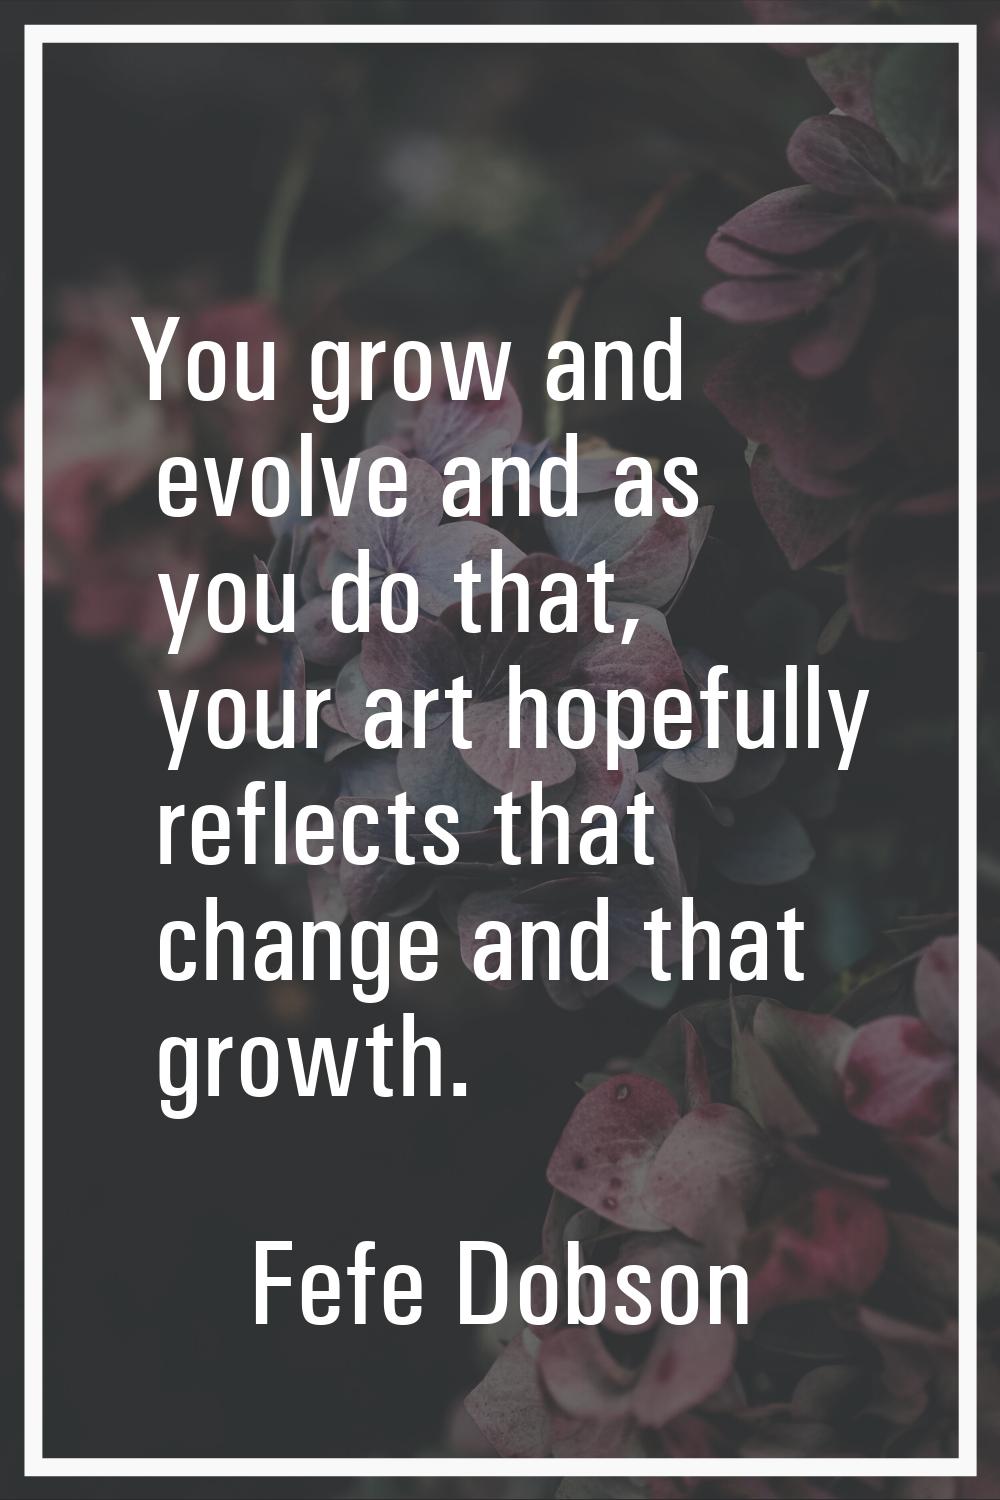 You grow and evolve and as you do that, your art hopefully reflects that change and that growth.